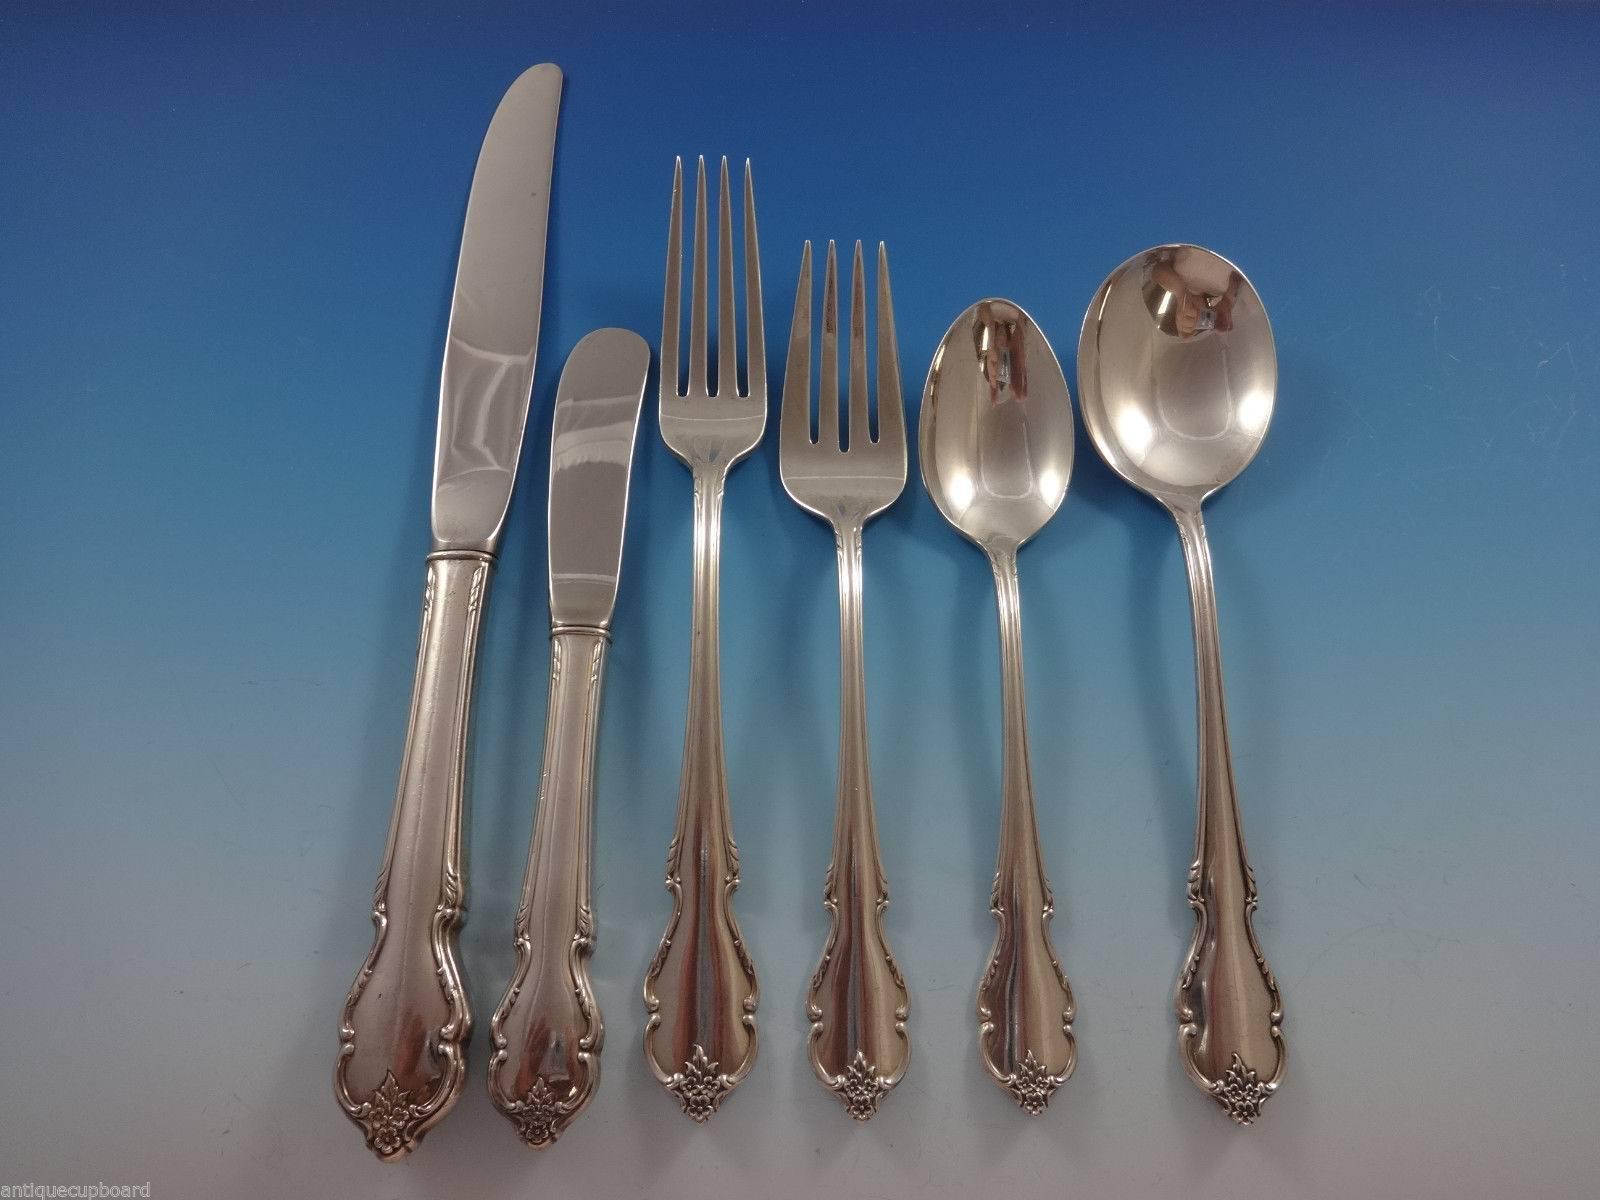 Stunning Breton Rose by International sterling silver flatware set of 72 pieces. This set includes:

12 knives, 9 1/4